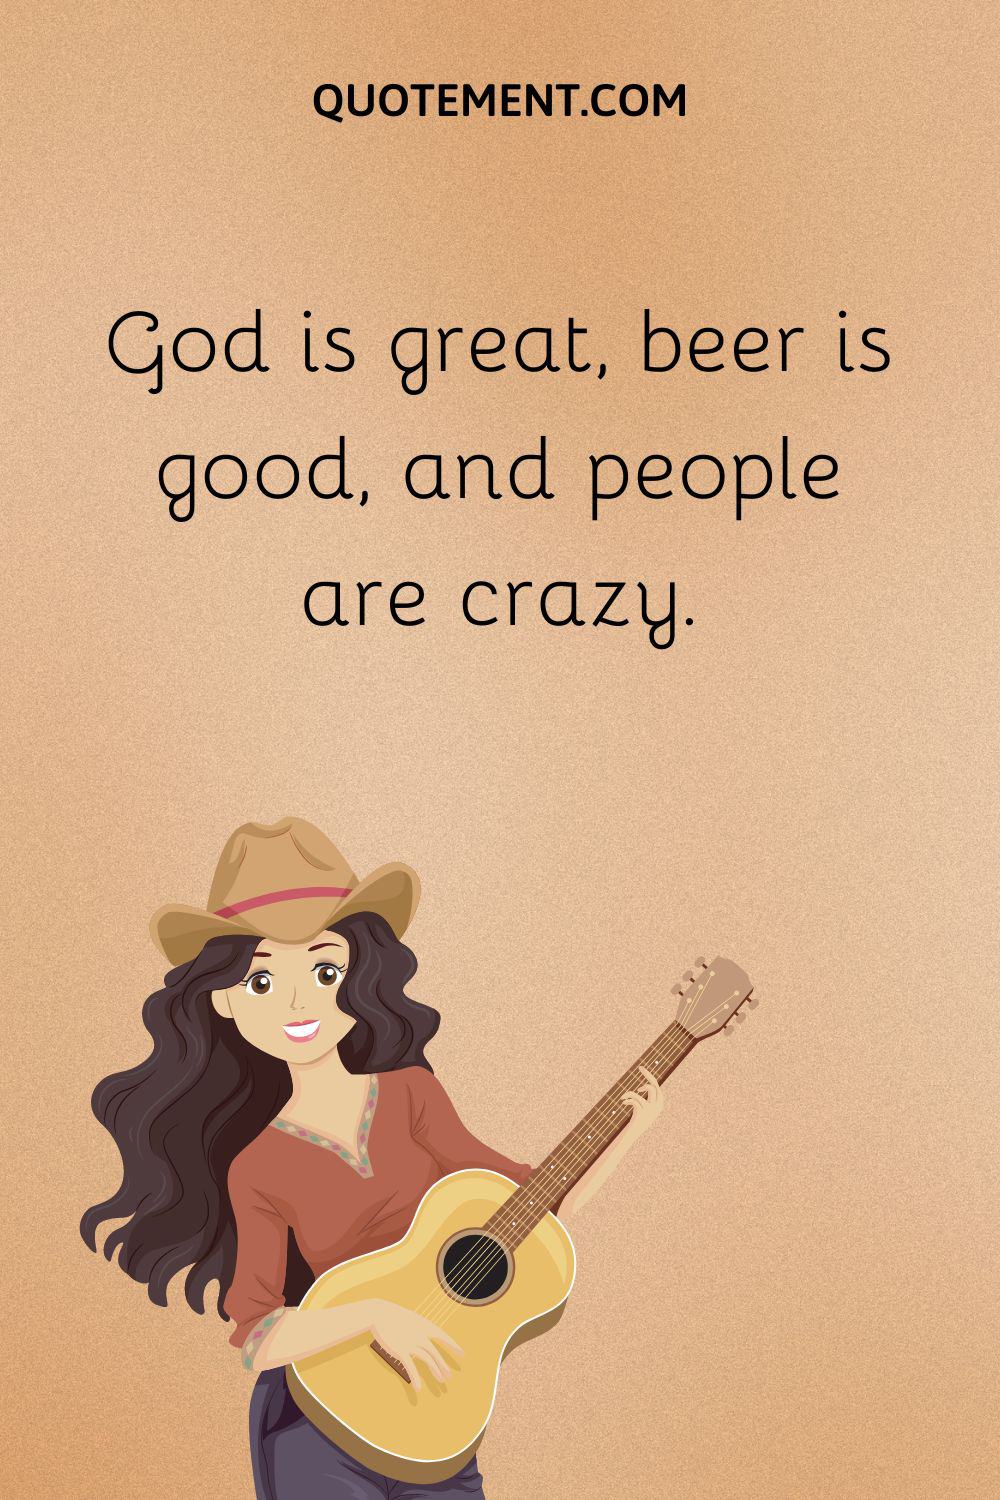 God is great, beer is good, and people are crazy